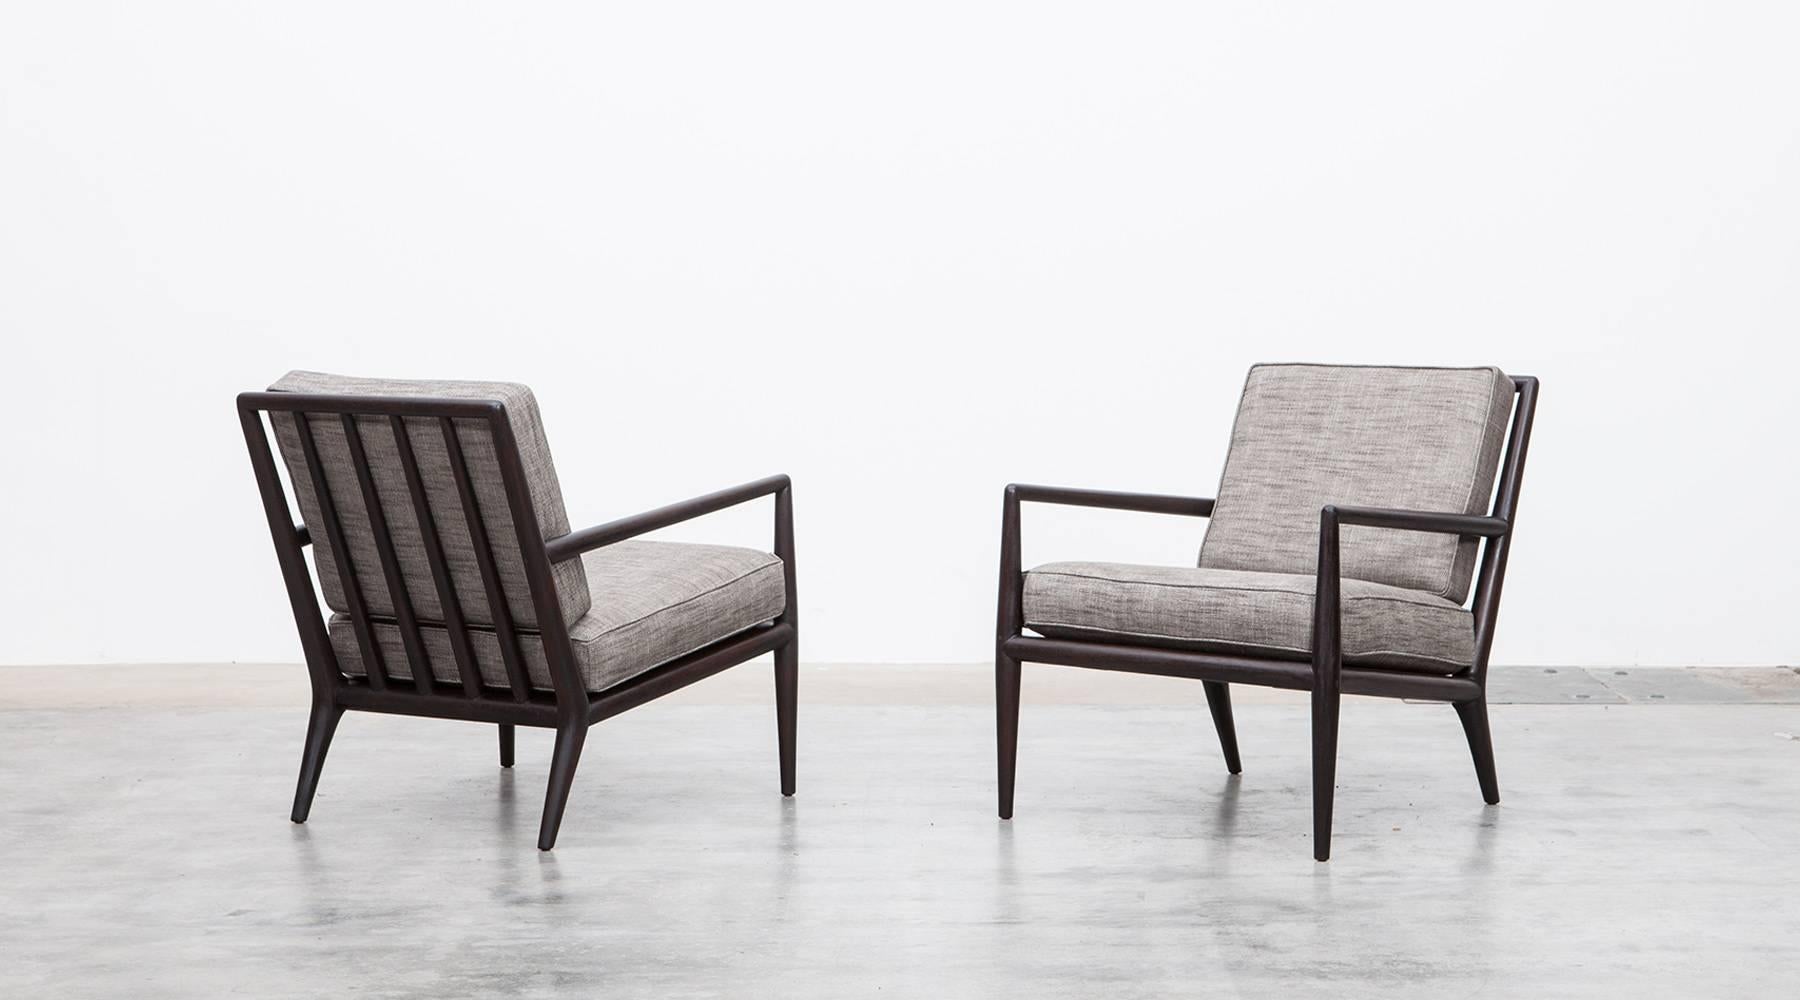 Lounge Chairs by Robsjohn-Gibbings, new upholstery, USA, 1950.

A classical example of lounge chairs designed by T. H. Robsjohn-Gibbings comes with an elegantly developed framework, which gives the chairs a good looking and comfortable seating. The